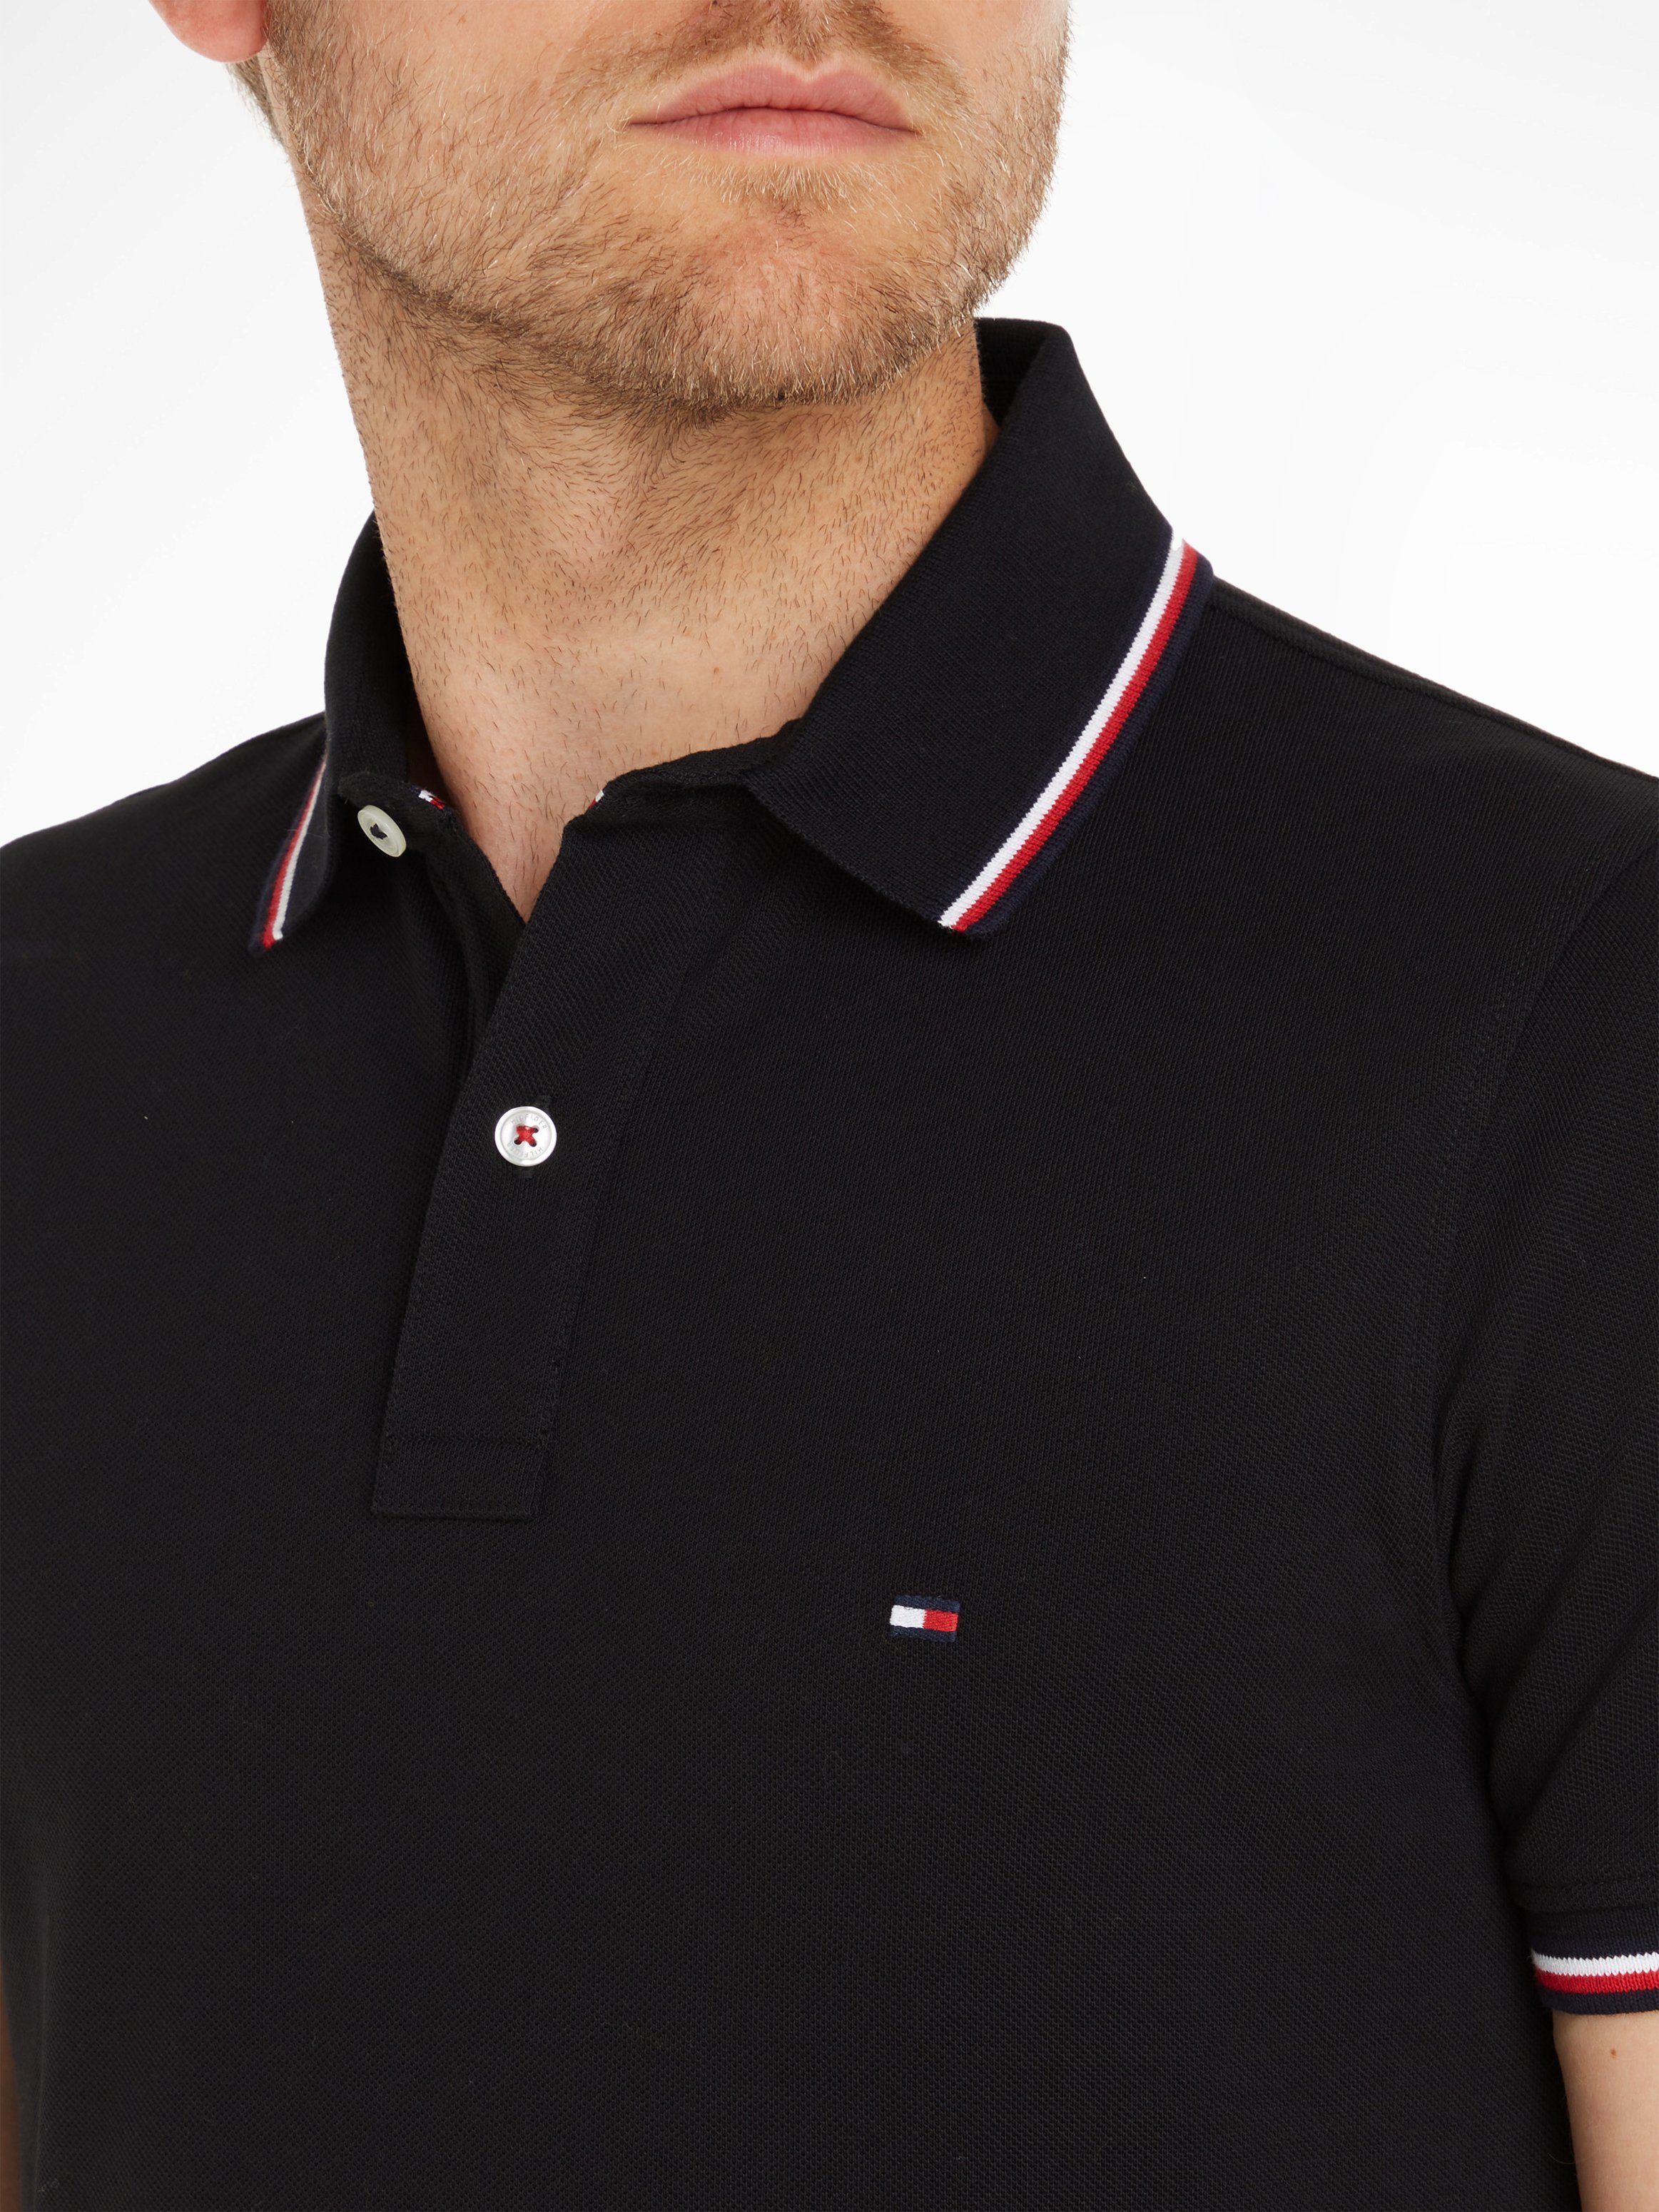 POLO black Poloshirt TOMMY TIPPED Tommy Hilfiger SLIM